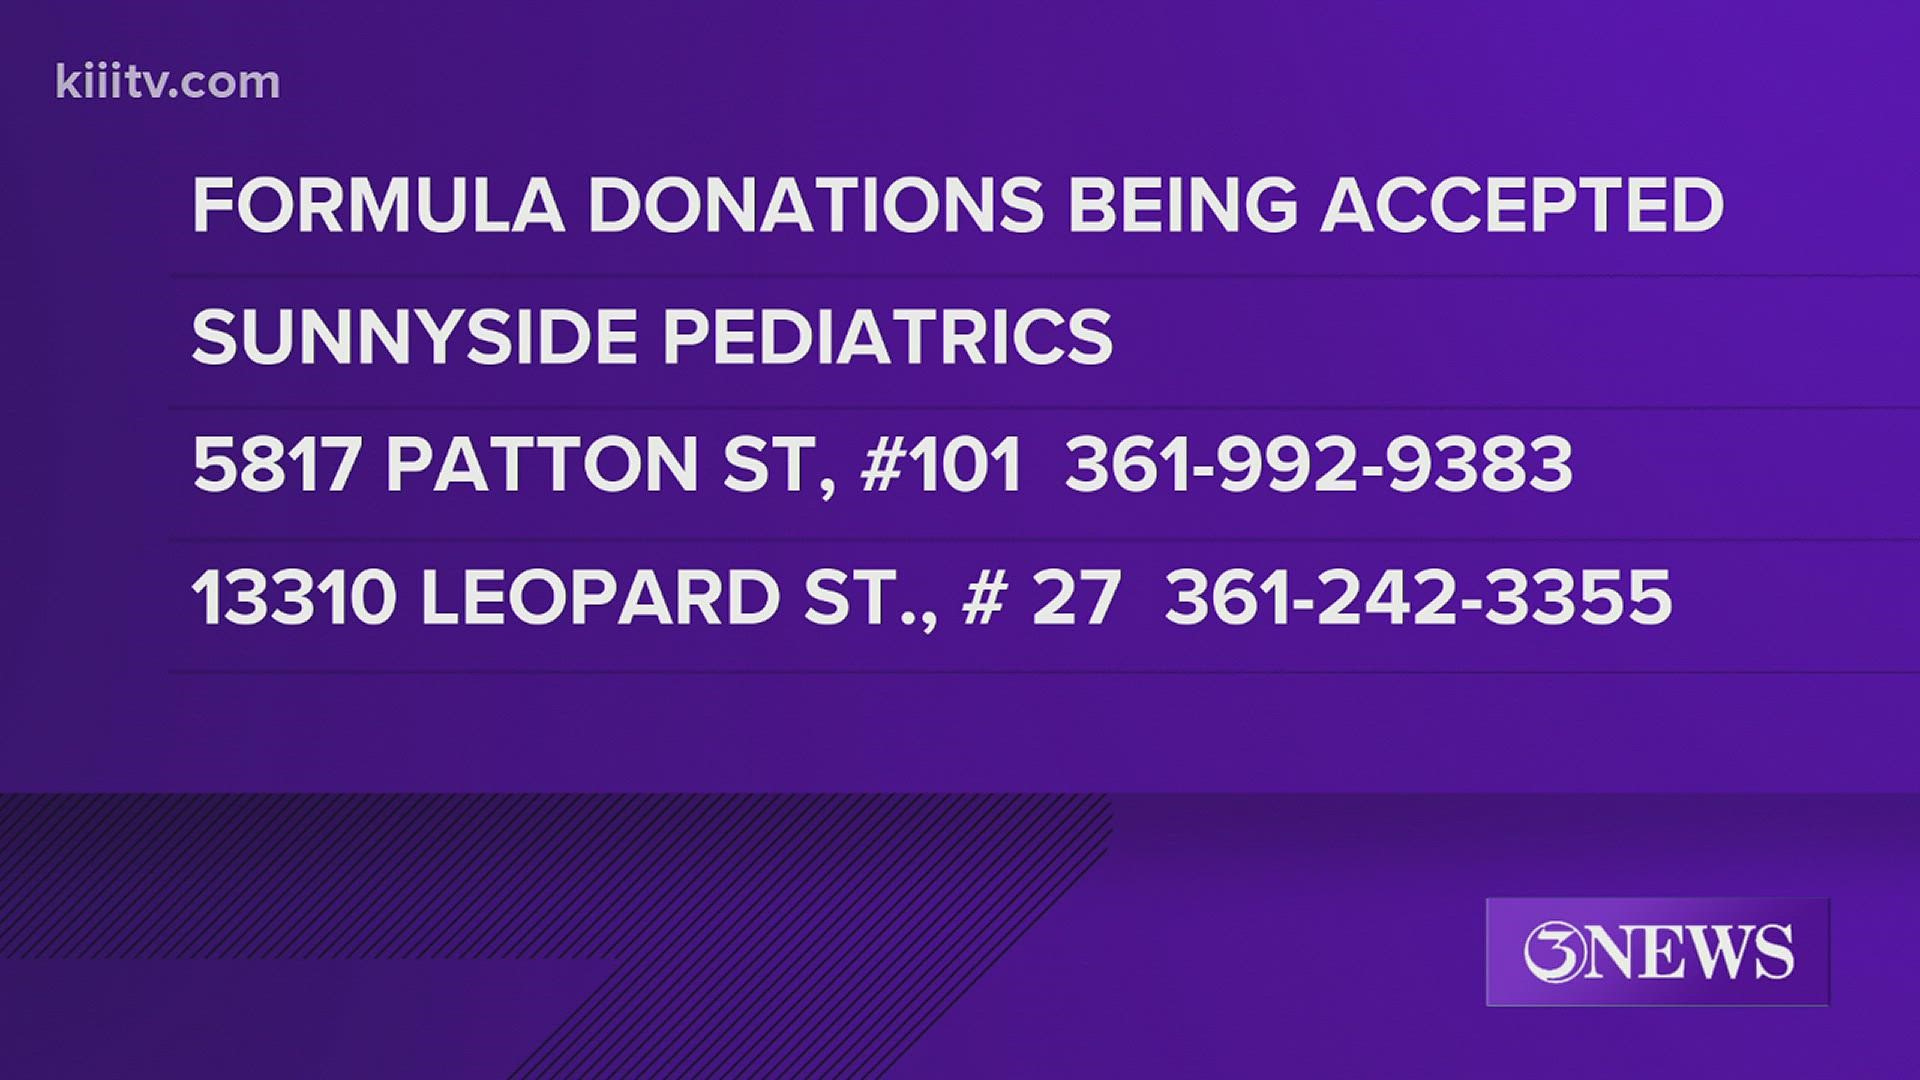 Sunnyside Pediatrics is accepting new, sealed, unexpired cans and containers of powdered or liquid baby formula.